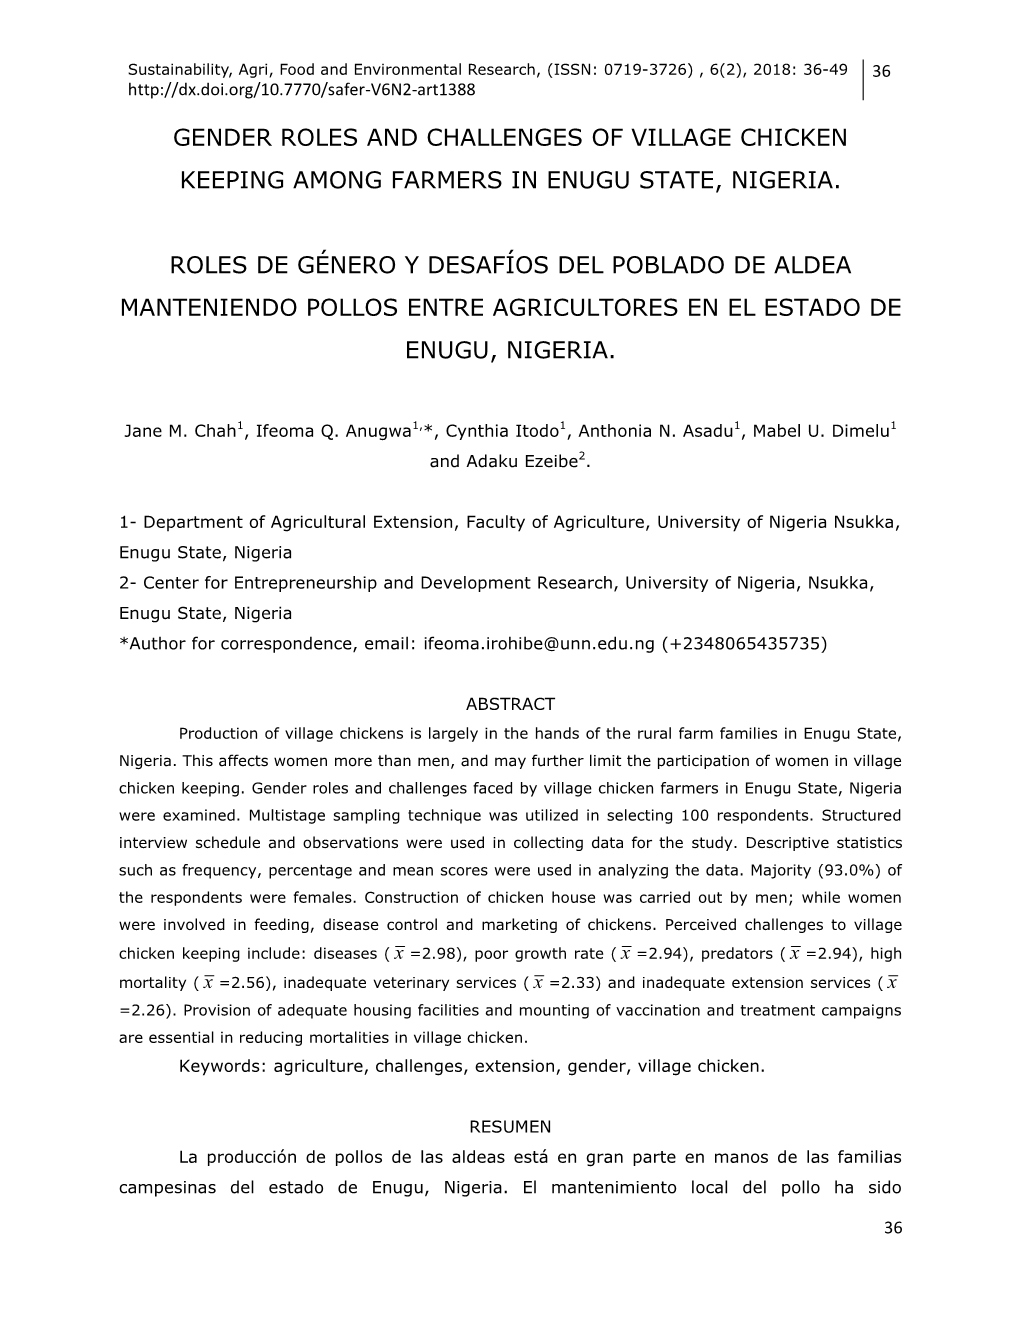 Gender Roles and Challenges of Village Chicken Keeping Among Farmers in Enugu State, Nigeria